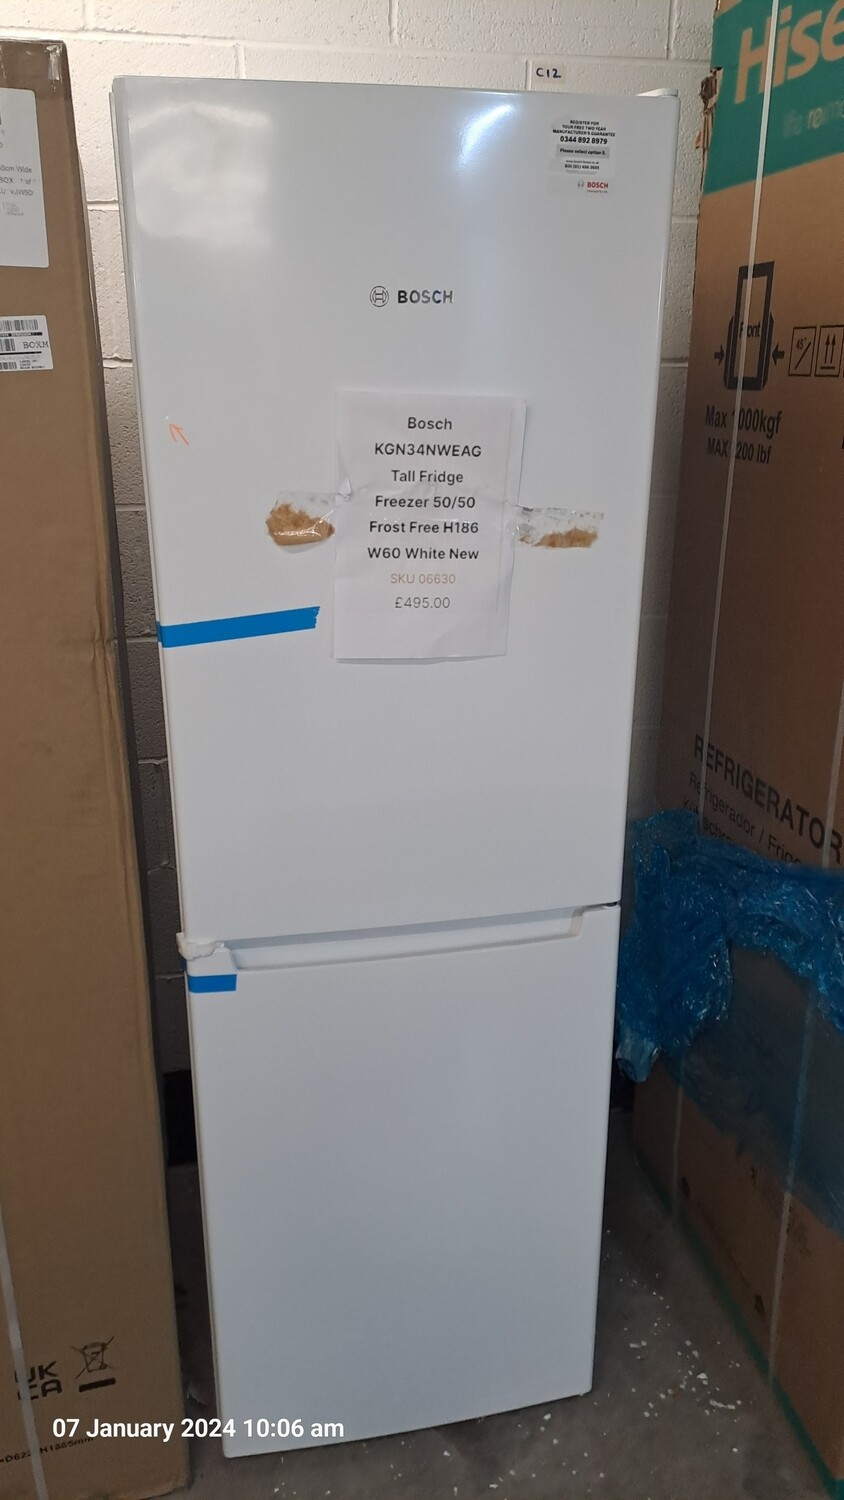 Bosch KGN34NWEAG Tall Fridge Freezer 50/50 Frost Free H186 W60 White New Graded. Whitby Road Shop 